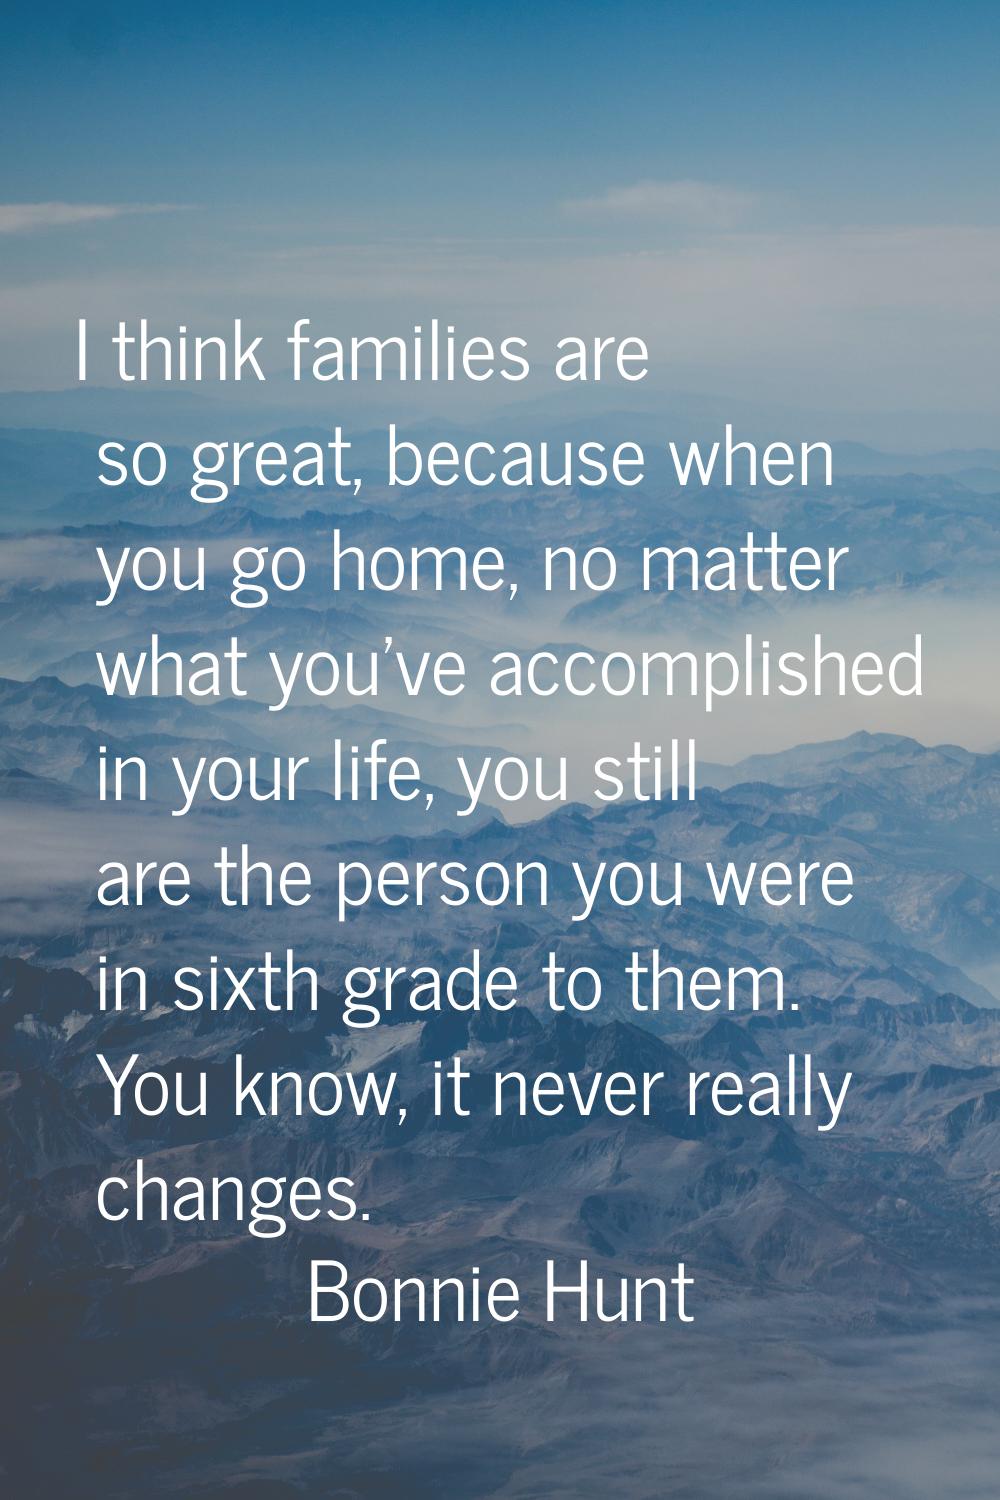 I think families are so great, because when you go home, no matter what you've accomplished in your